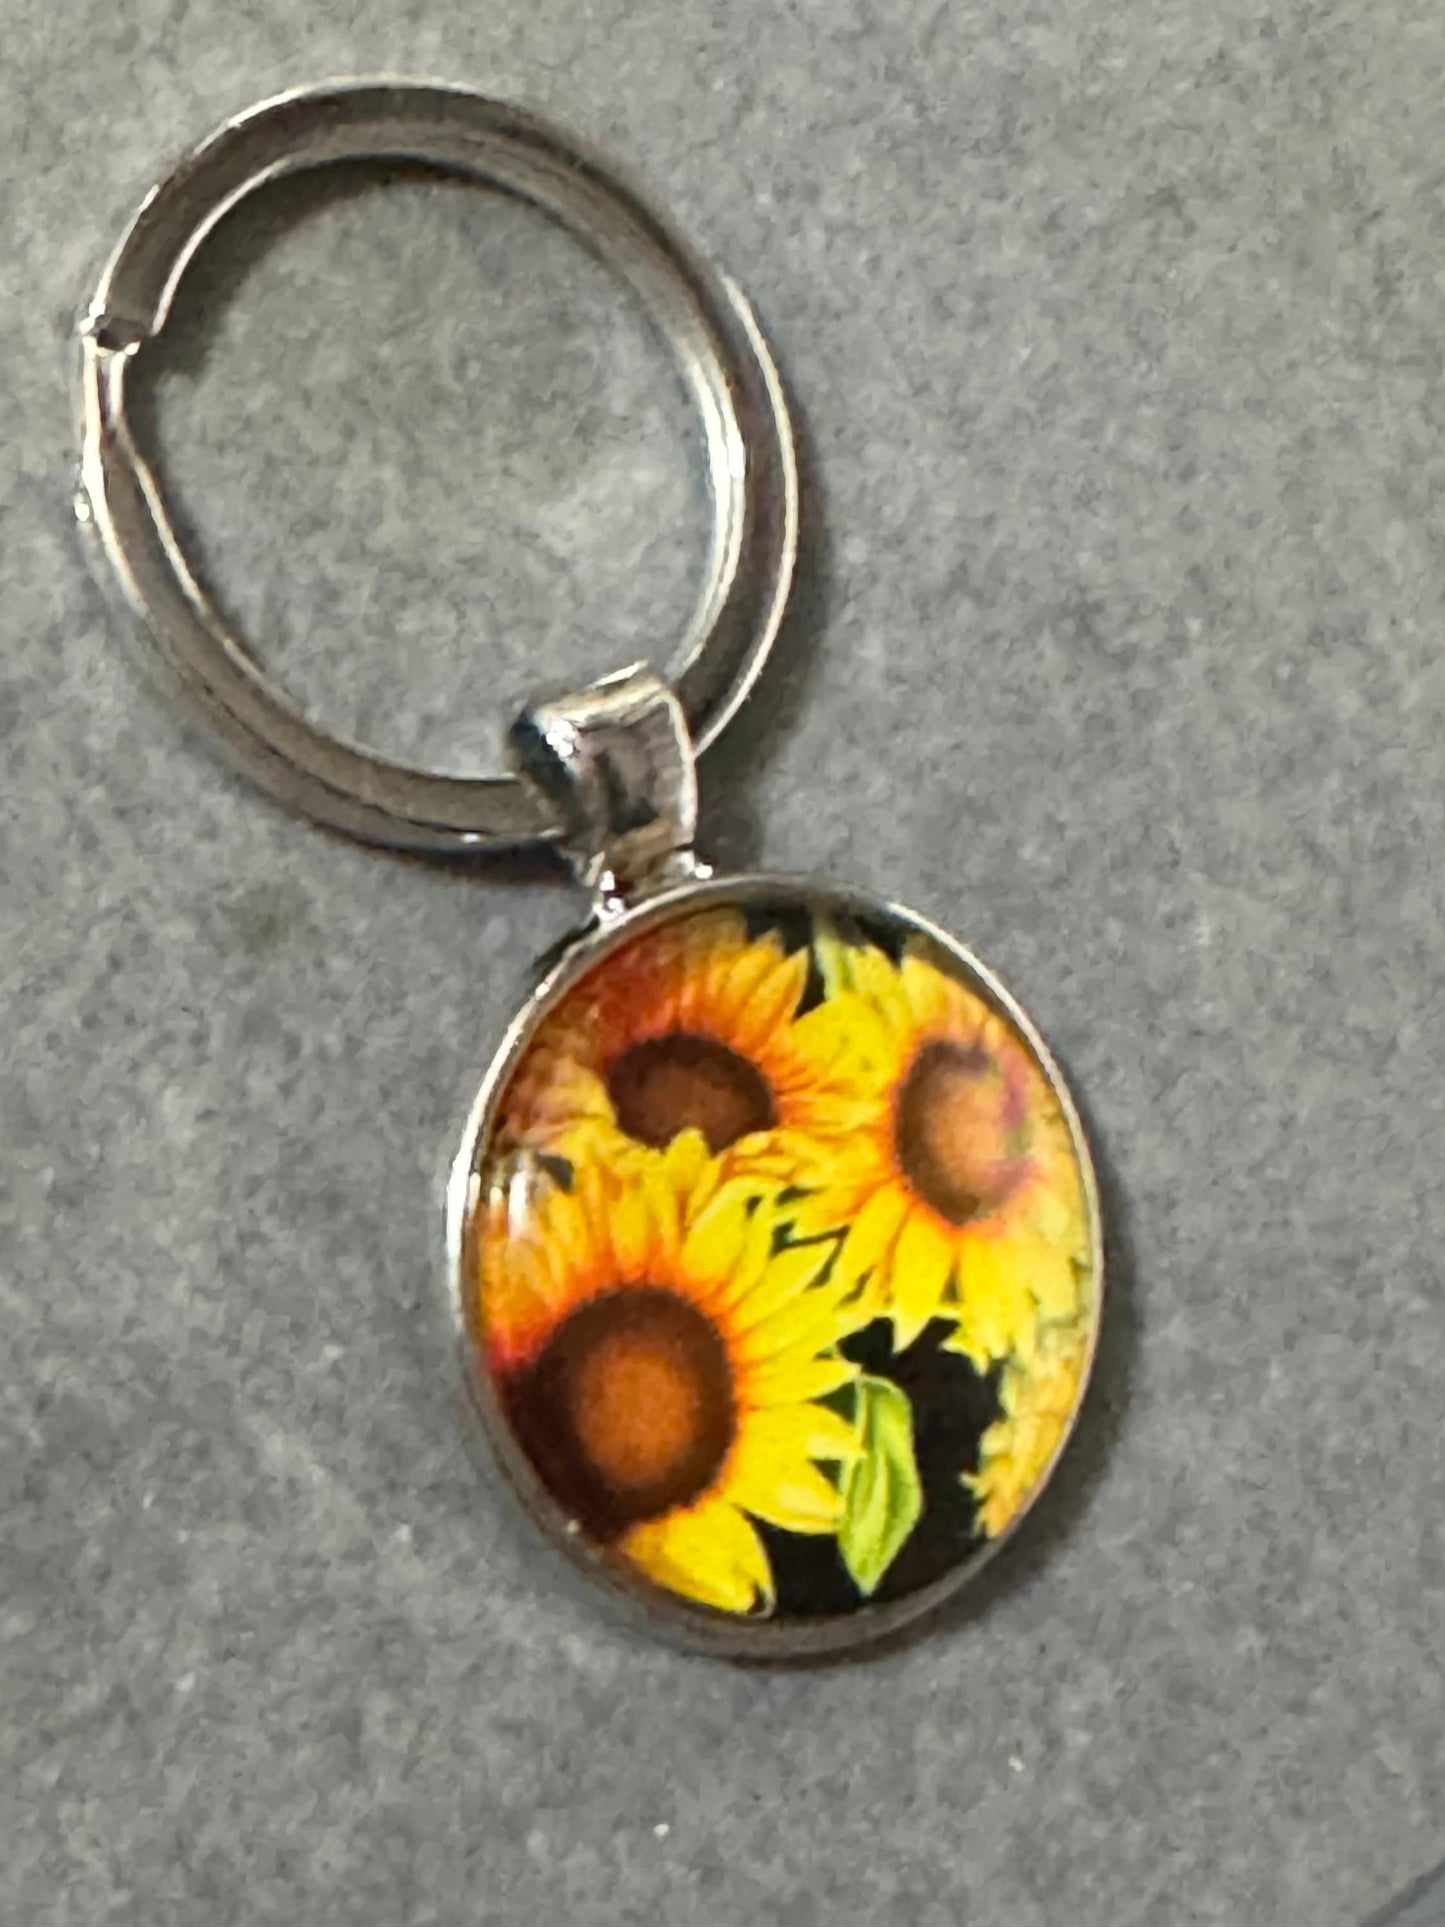 Handmade garden yellow Sunflowers silver tone keyring with 25mm glass cabochon